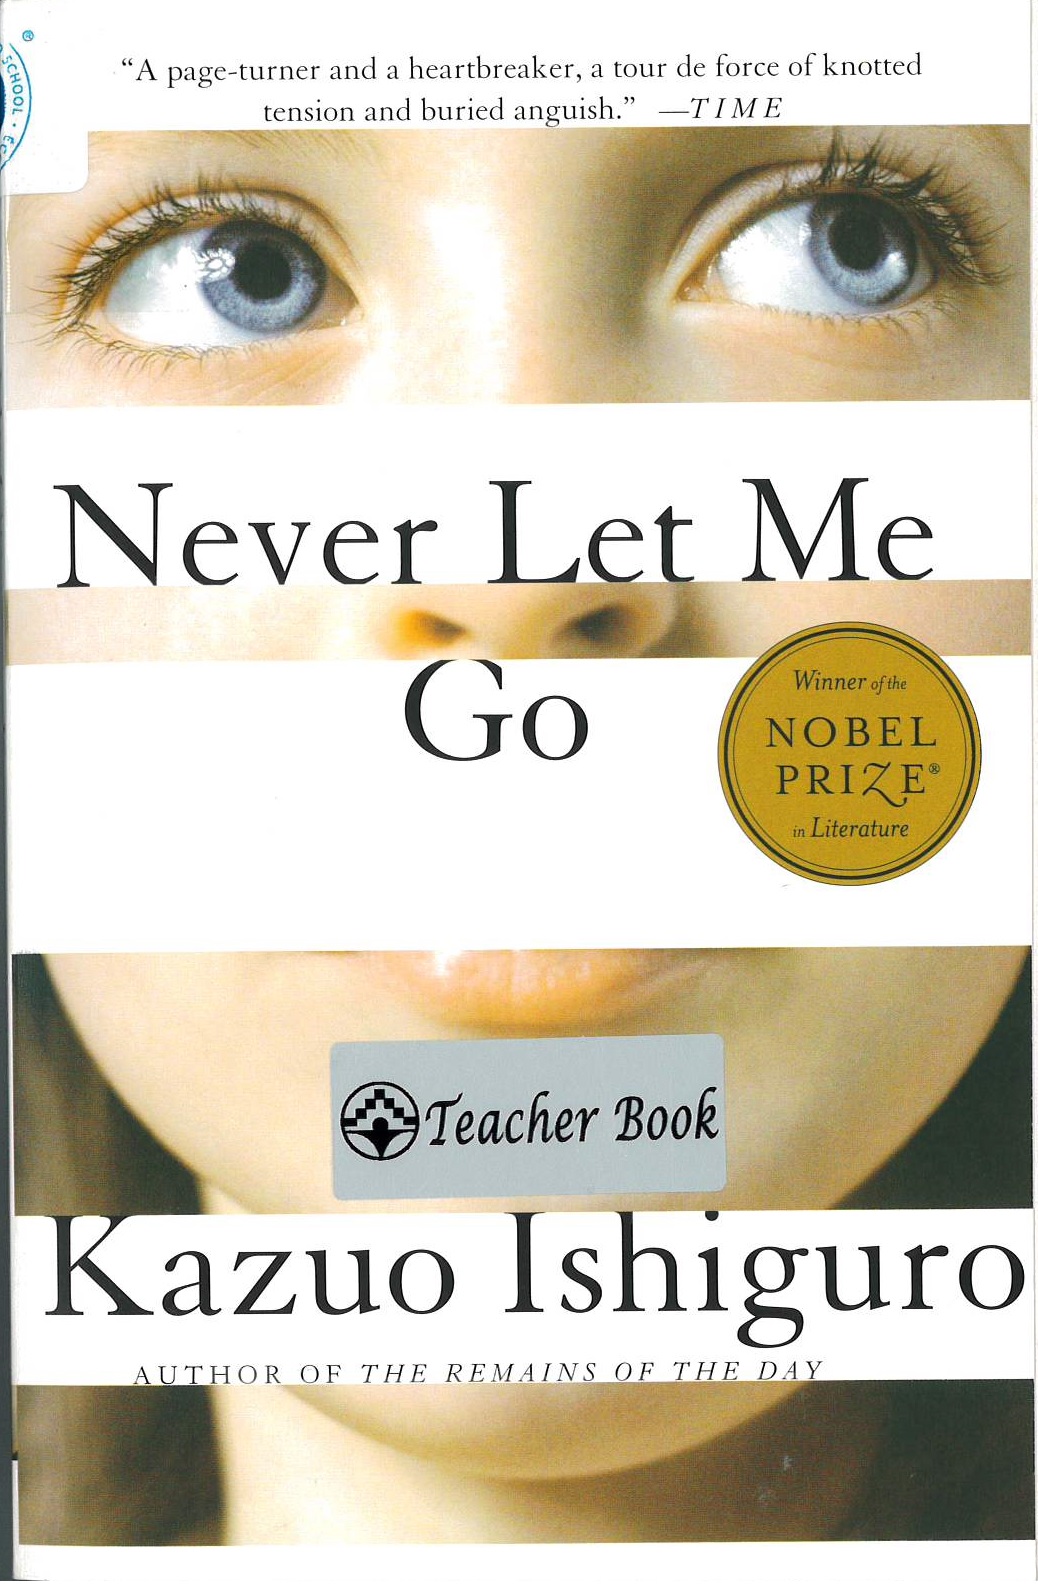 Never let me go [For IB]